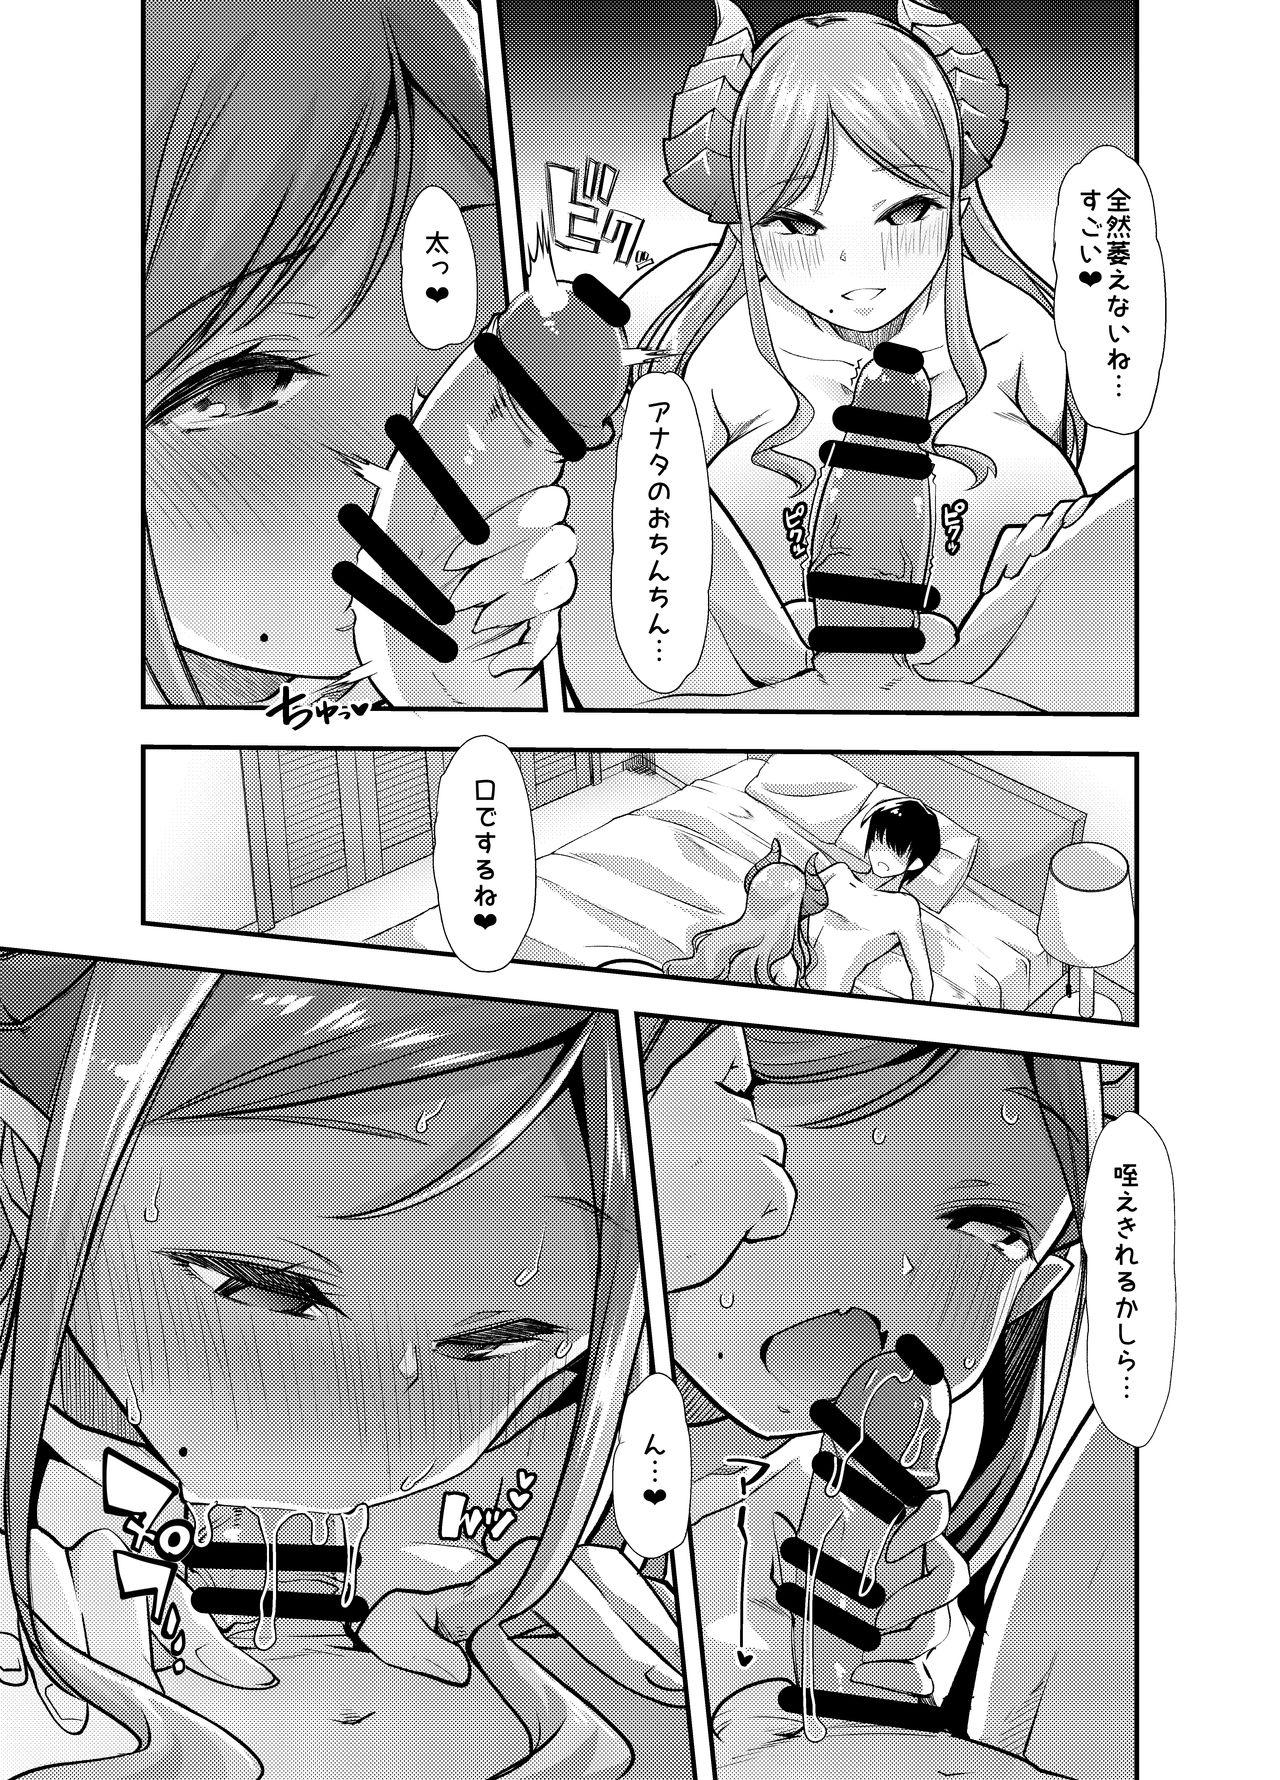 Asses Mary-san is Sexually Talented Fodendo - Page 7